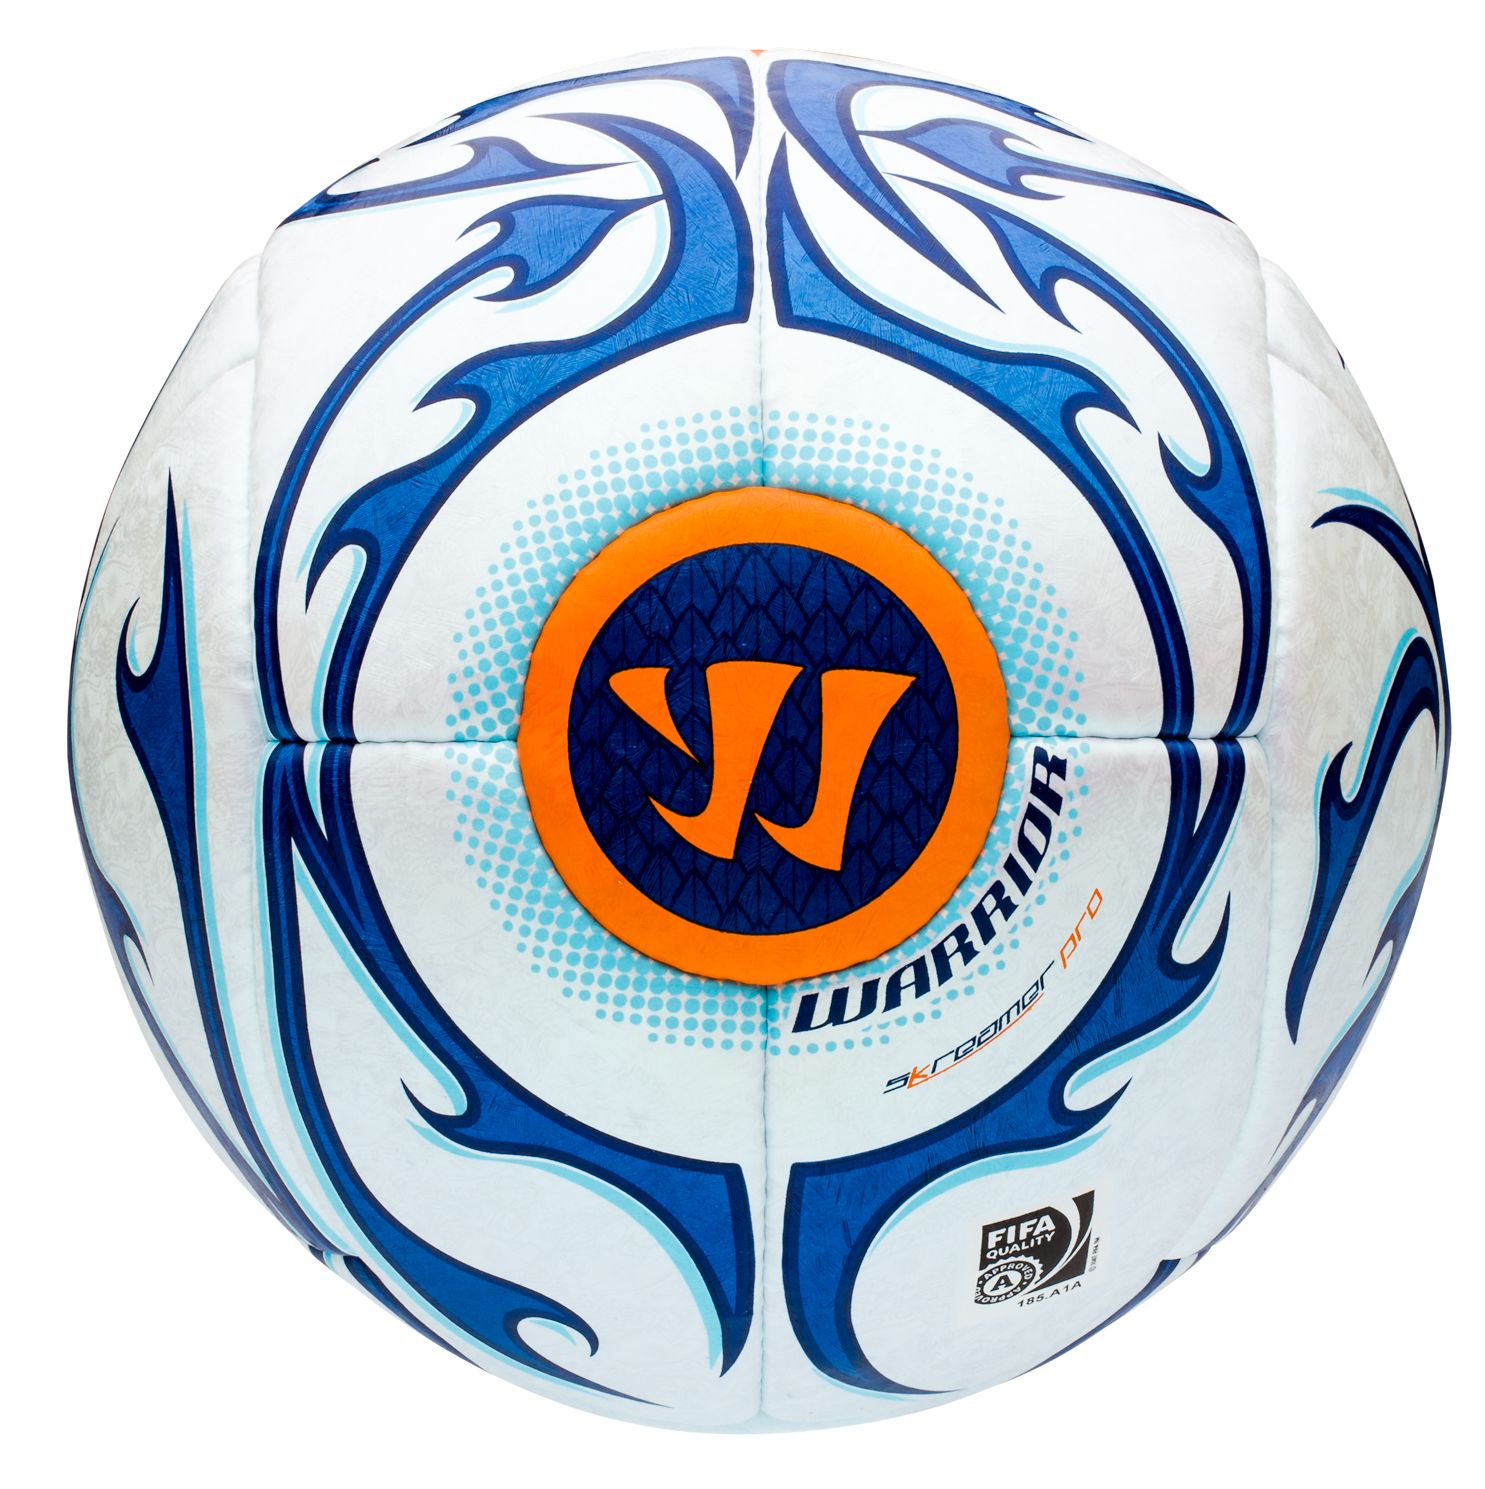 Skreamer Pro Ball, White with Blue Radiance & Insignia Blue image number 0